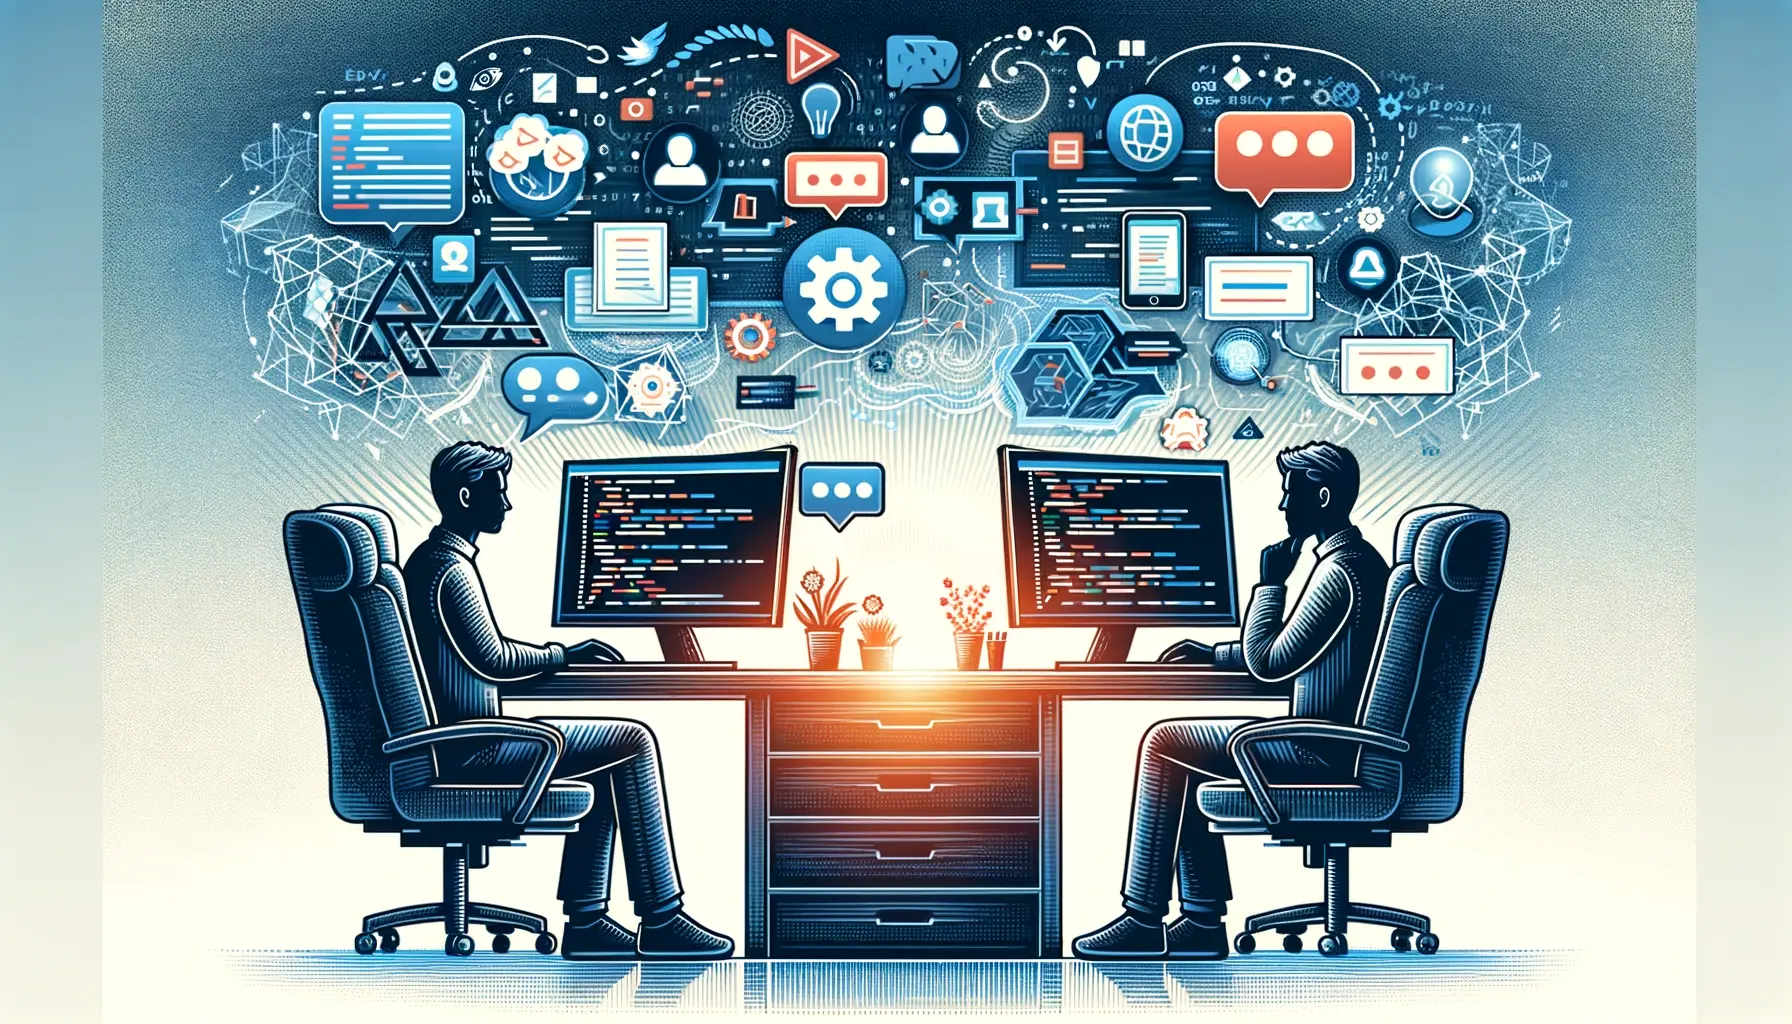 The image illustrates the concept of pair programming with two developers seated side by side at a workstation, deeply engaged in coding on a shared computer screen. Symbols of collaboration, such as dialogue bubbles, shared tasks, and code snippets, float between them, symbolizing their joint effort and communication. The background is filled with digital elements, suggesting a high-tech, innovative environment. The overall image conveys teamwork, concentration, and the dynamic, interactive nature of pair programming in a modern development setting